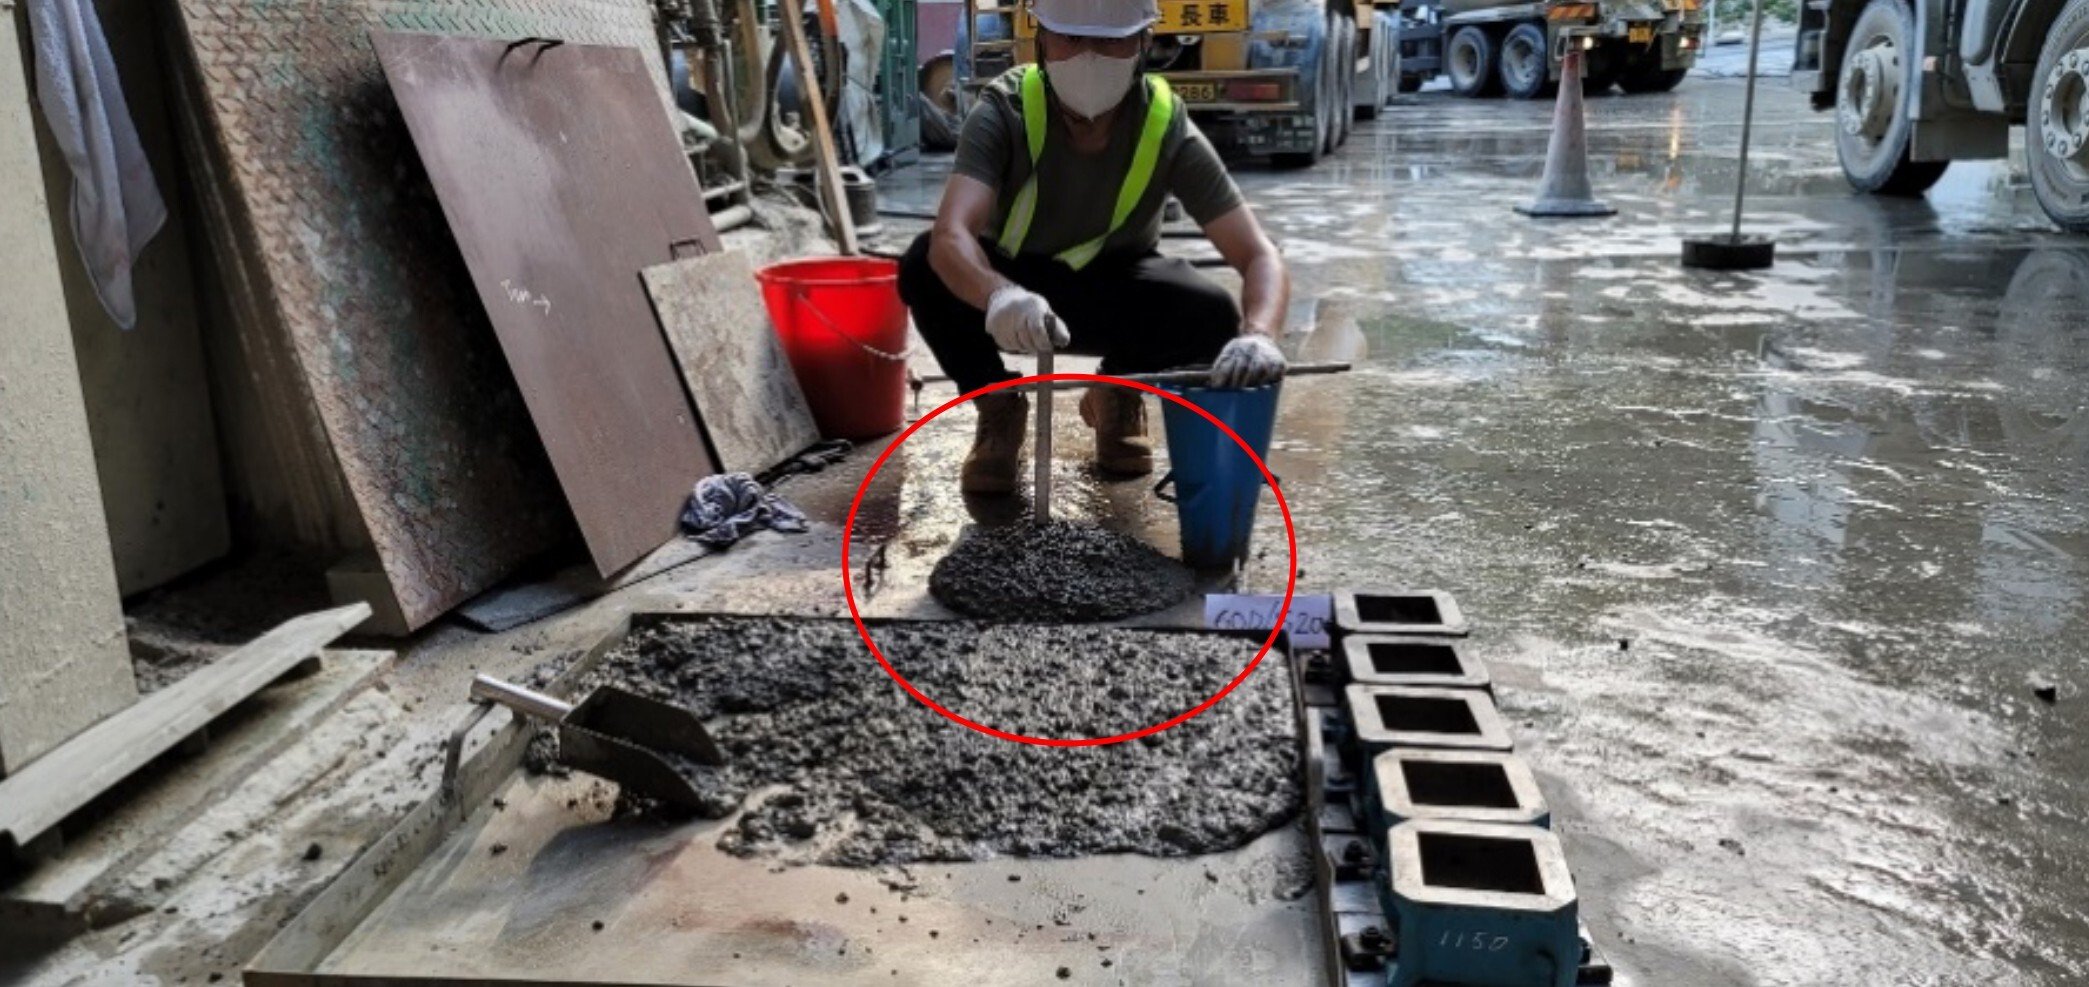 Sun Hung Kai Properties will produce different grades of concrete in different shades of grey to allow on-site workers and supervisors to easily distinguish them and eliminate human error. Photo: Handout